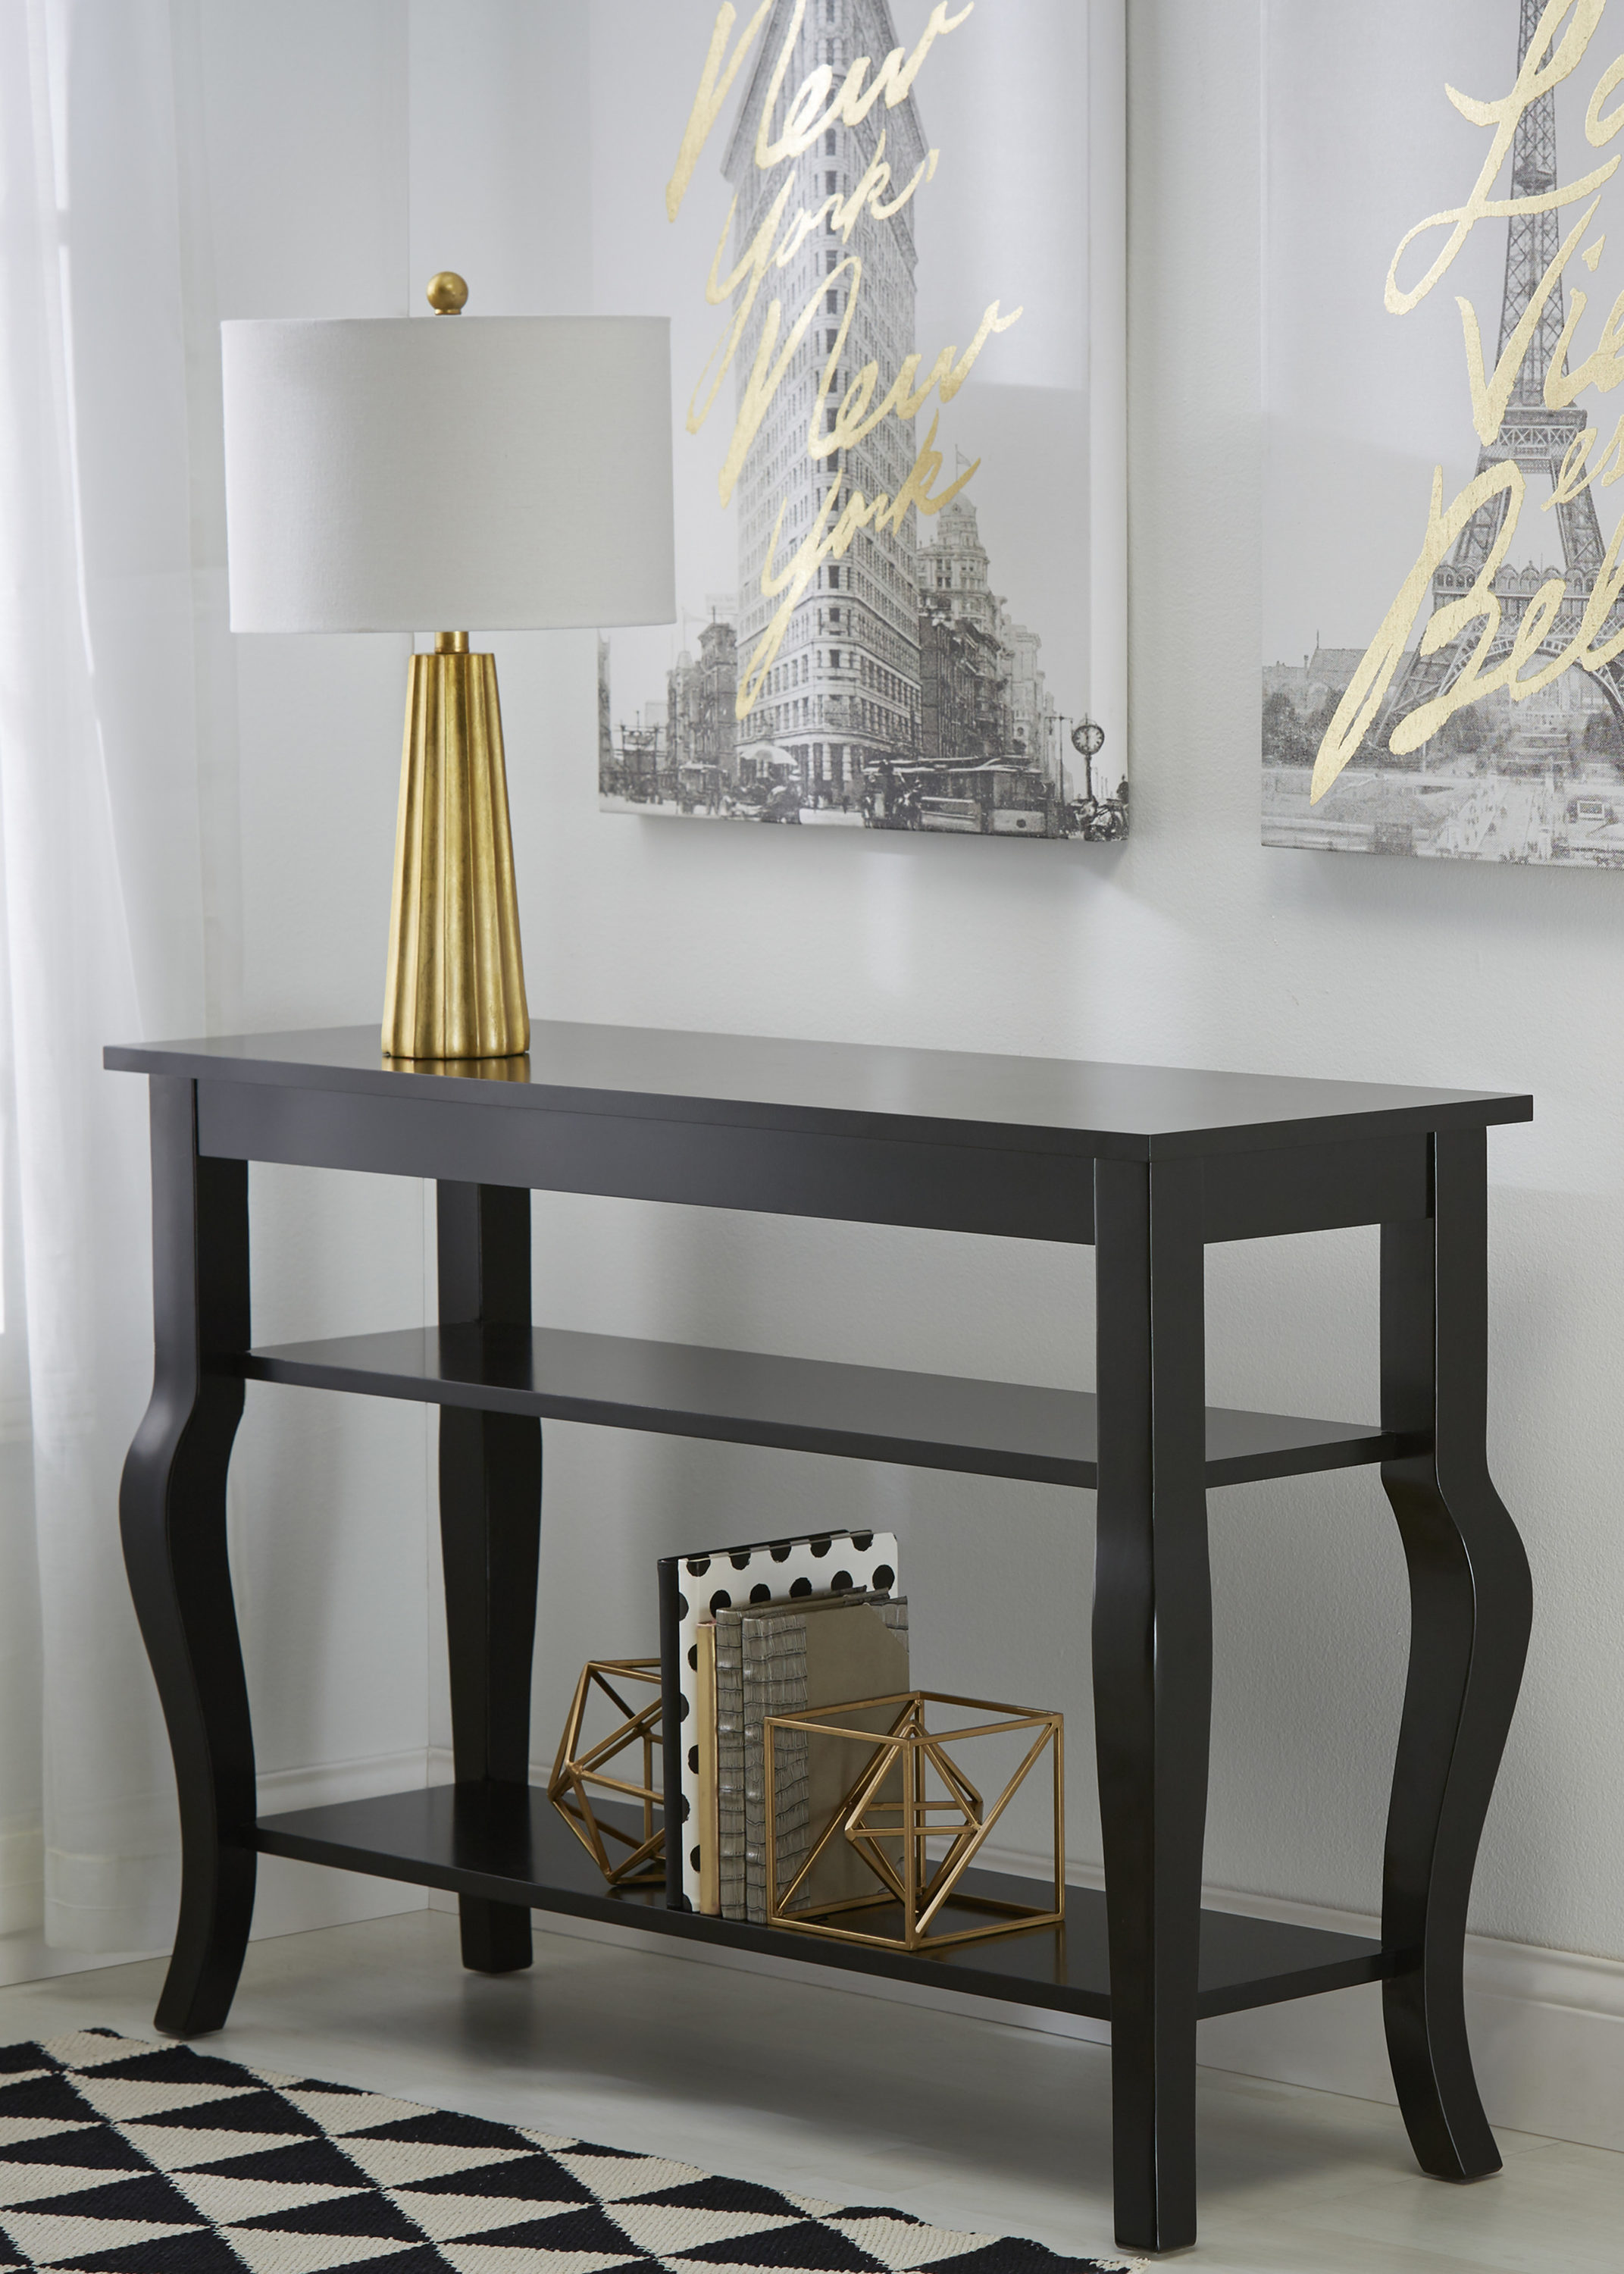 Kate and Laurel Lillian Wood Half Moon Console Table Curved Legs with Shelf Black